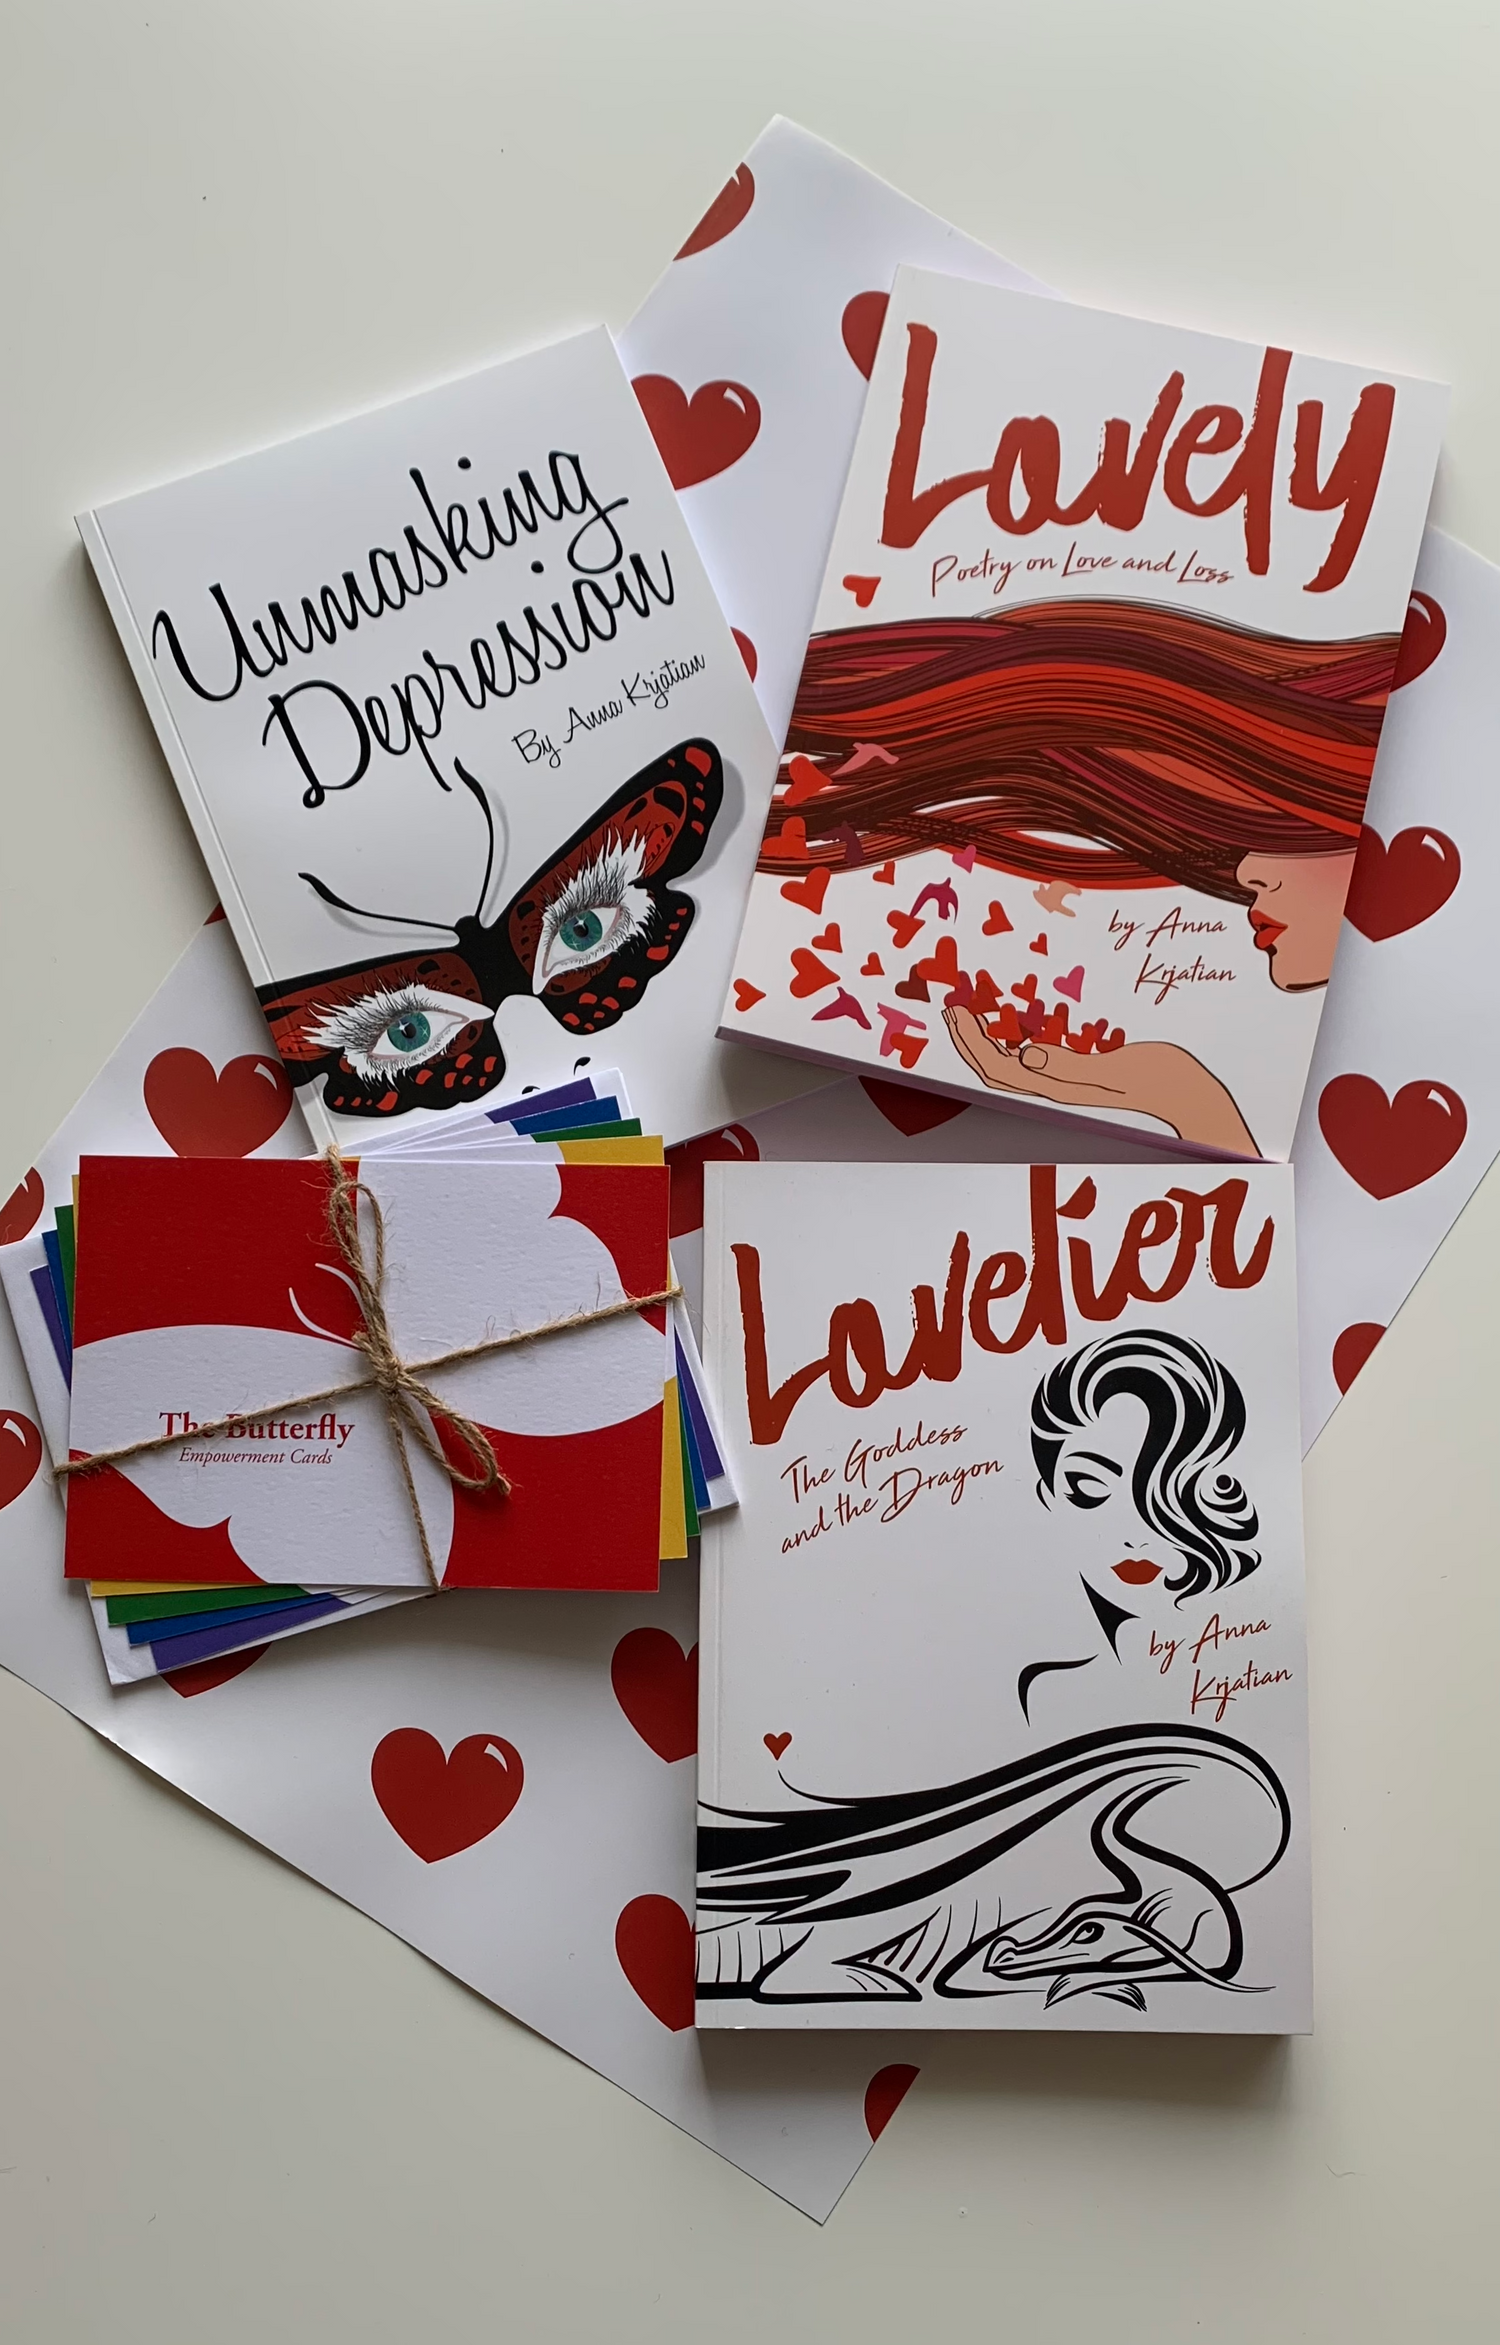 Three books "Unmasking Depression", "Lovely - Poetry on Love and Loss" and "Lovelier - The Goddess and The Dragon" sit on top of a white wrapping paper with bright red hearts on it. Next to the books is a pack of bright cards with a butterfly on them.